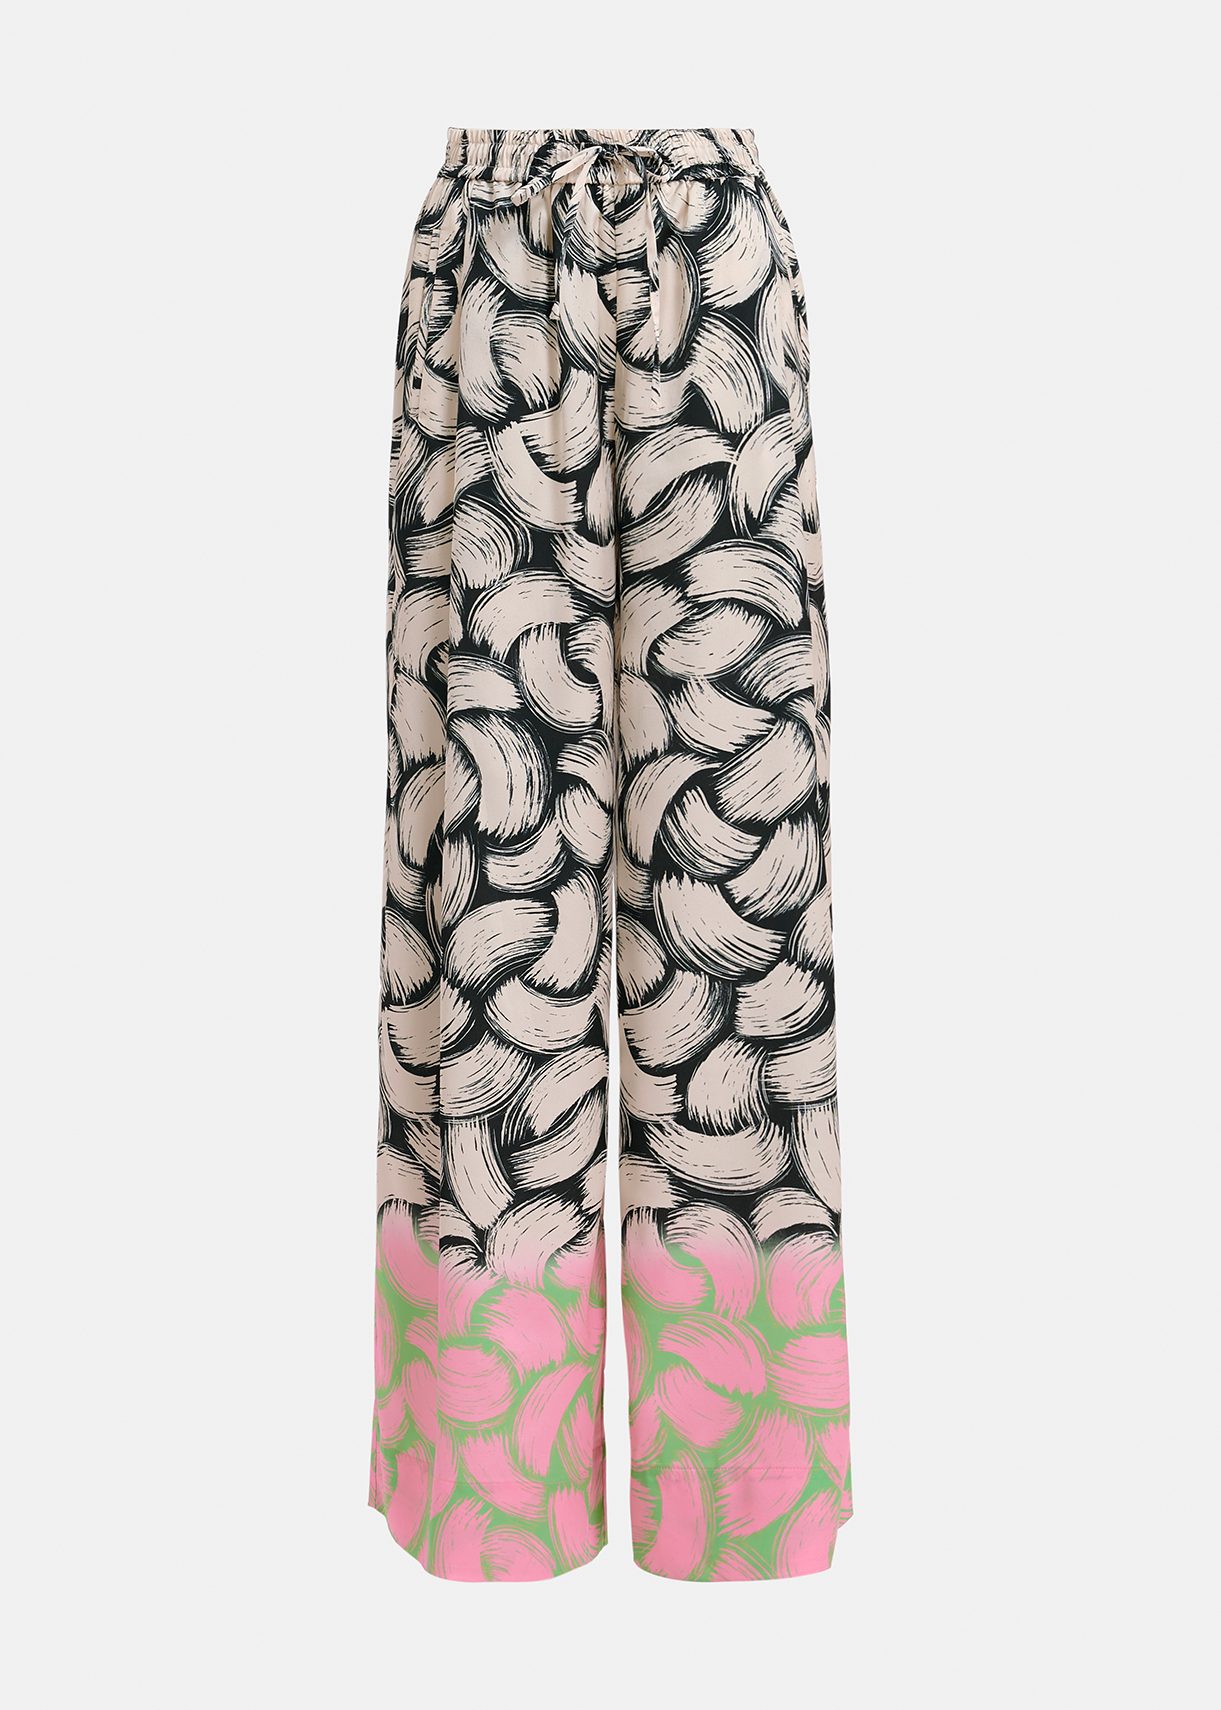 Essentiel Antwerp Off White Black and Pink Firm Pants